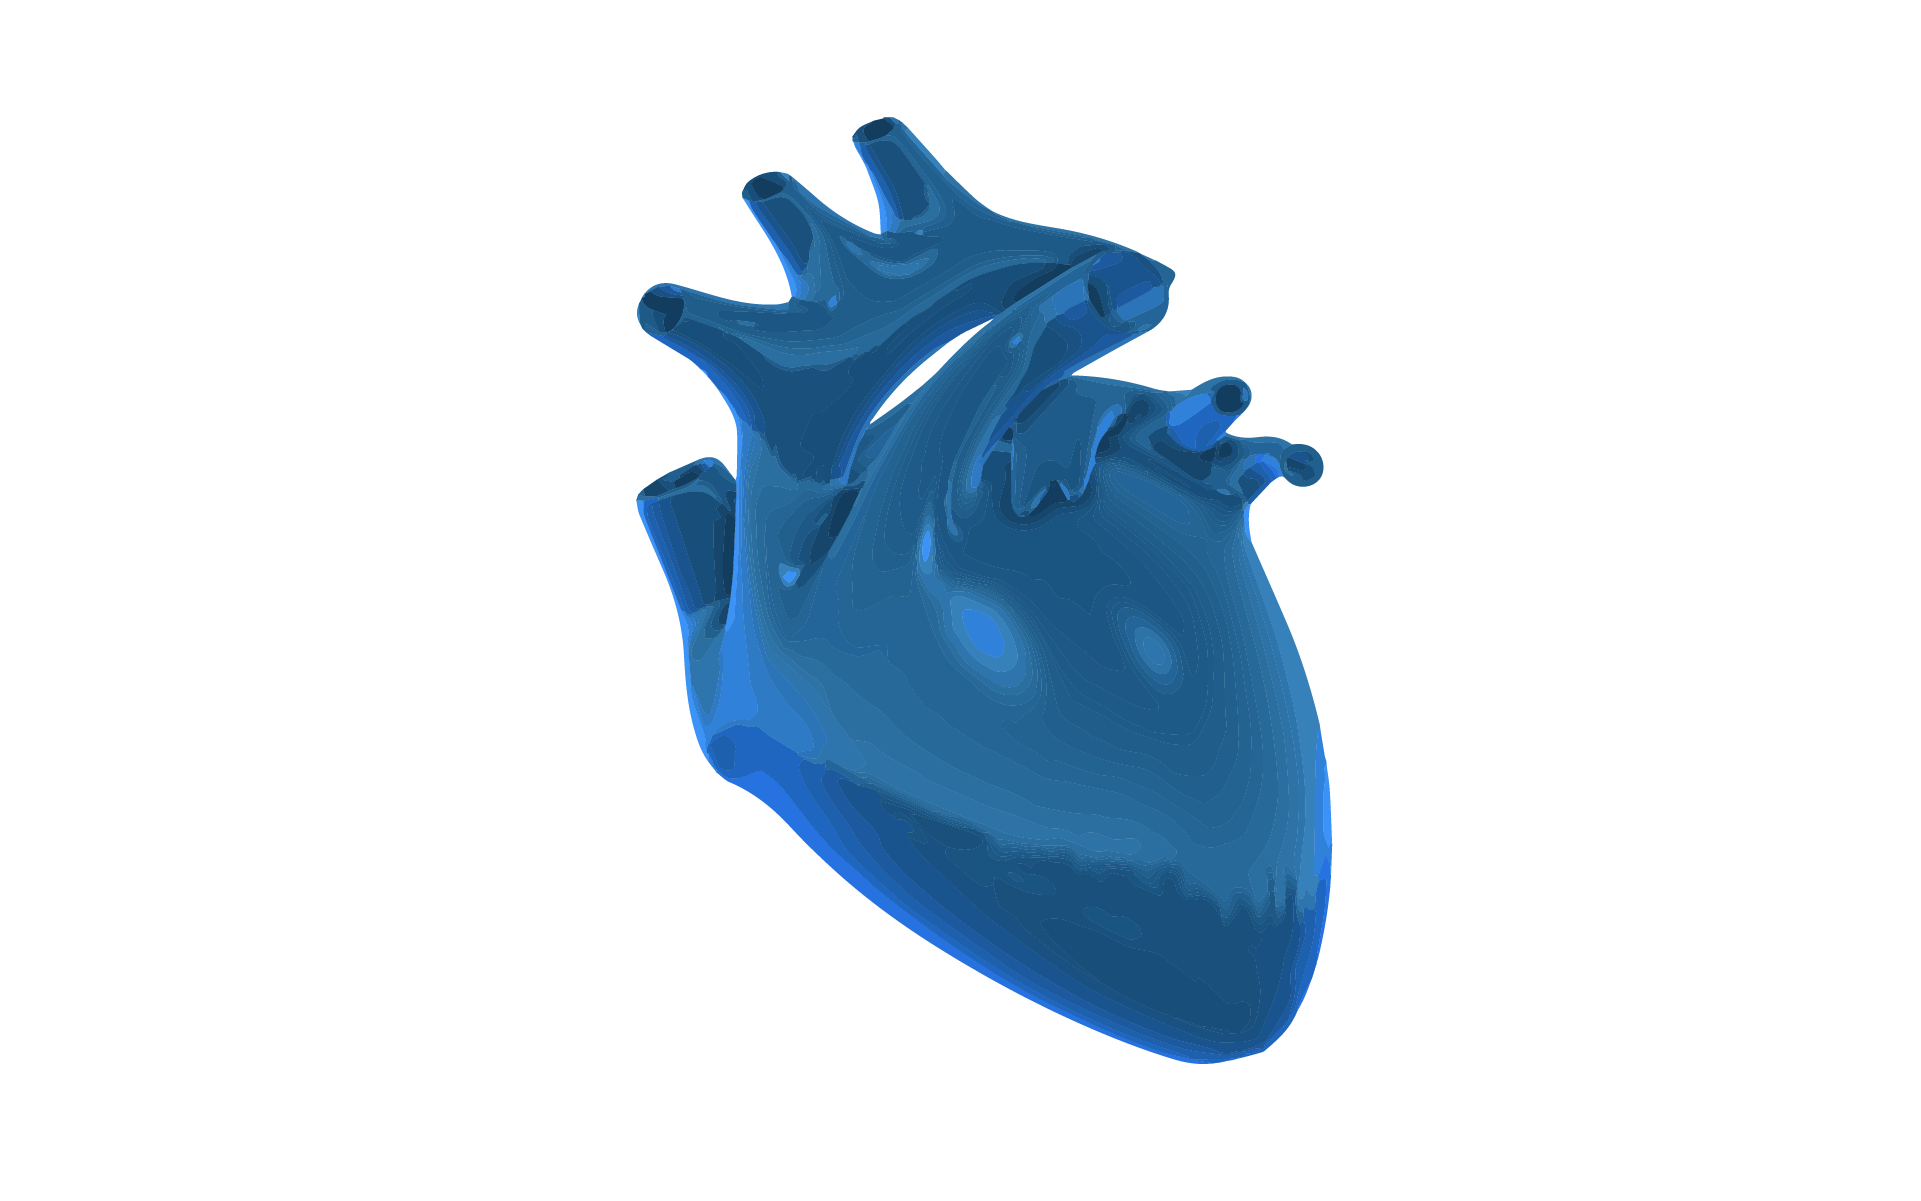 A 3D graphic image of the human heart